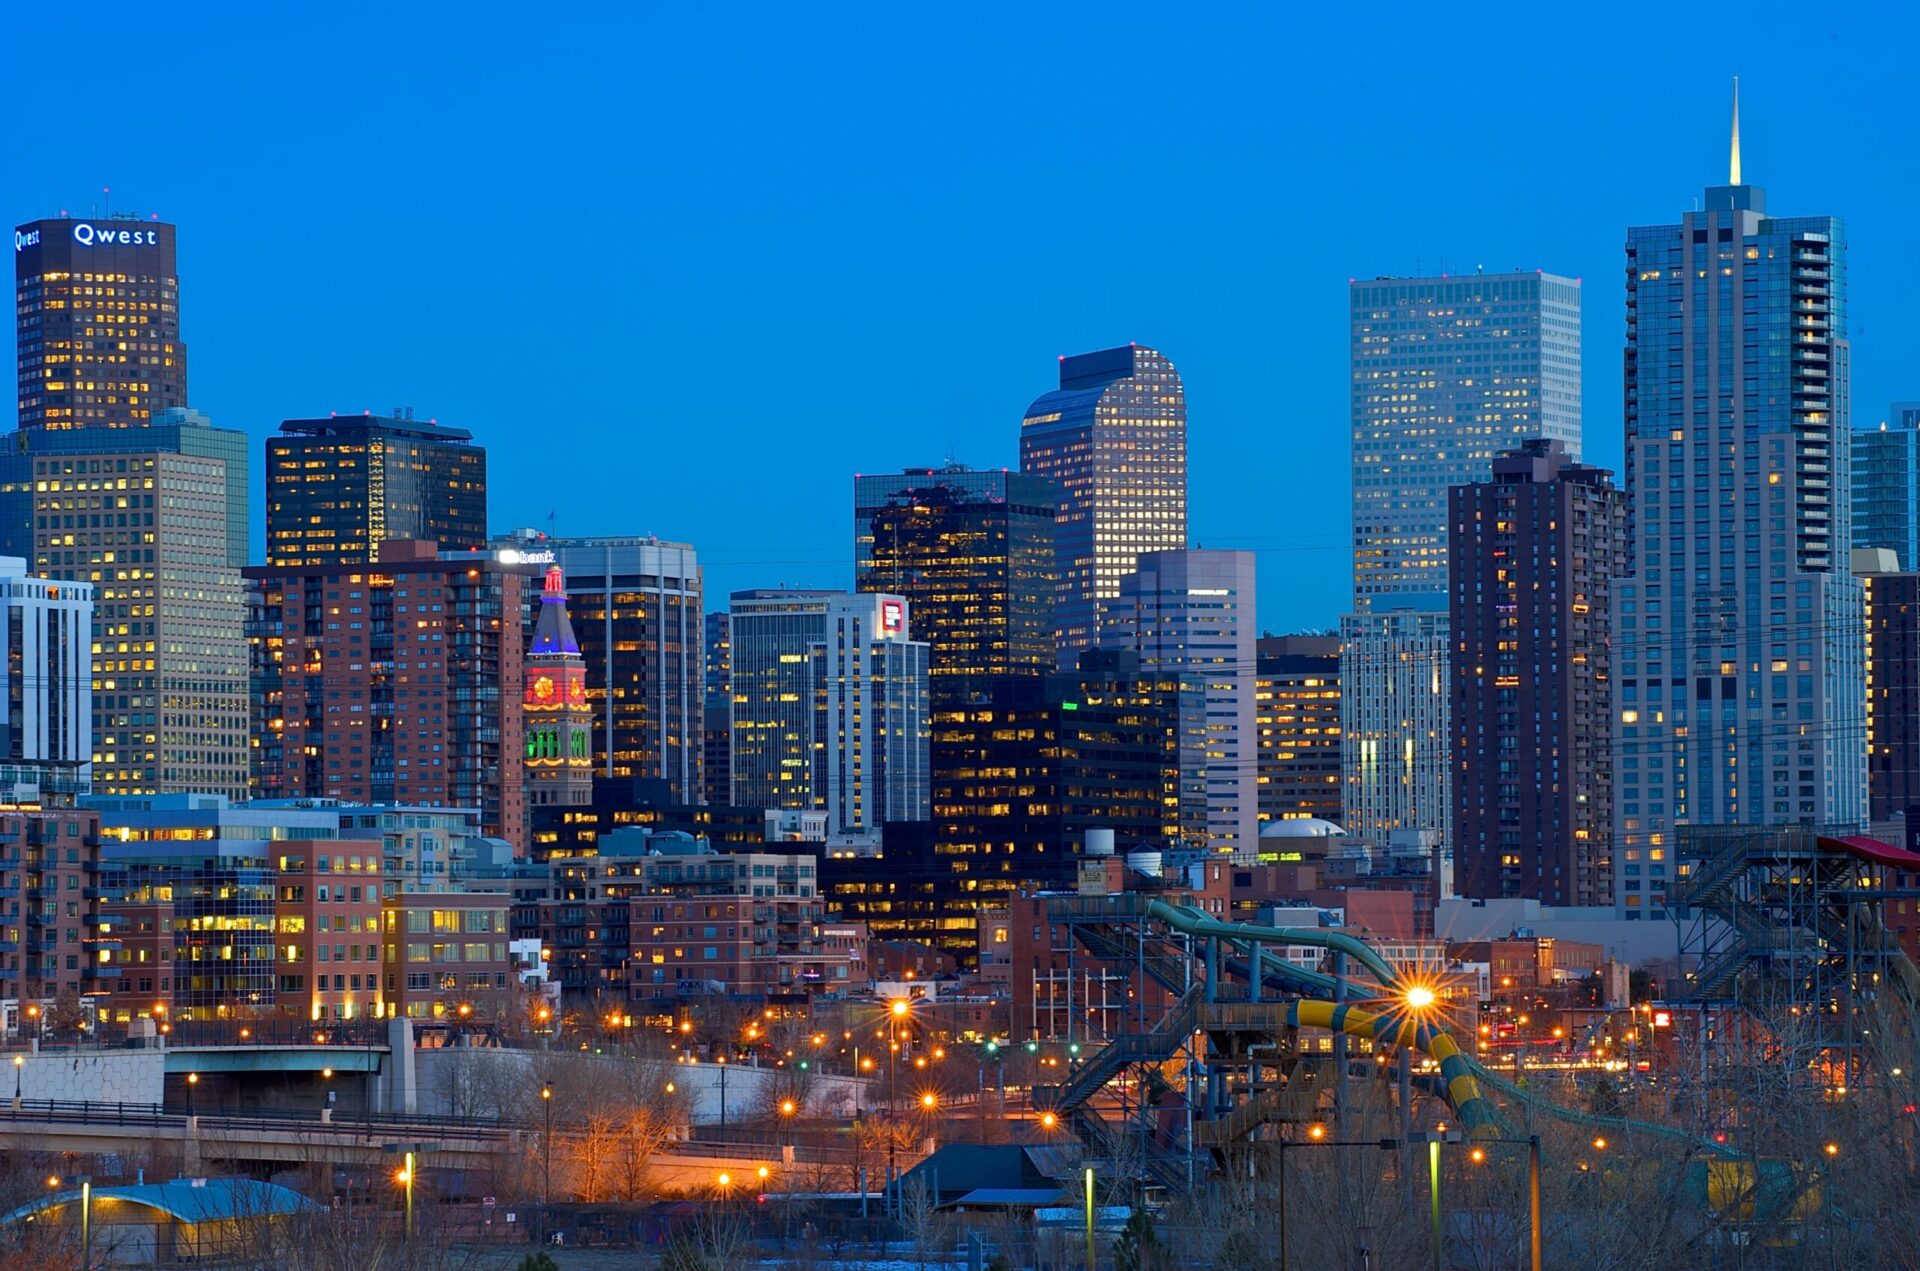 Built in Colorado: Vivian Health Raised $60M, Cin7 Partnered With Intuit, and More CO Tech News